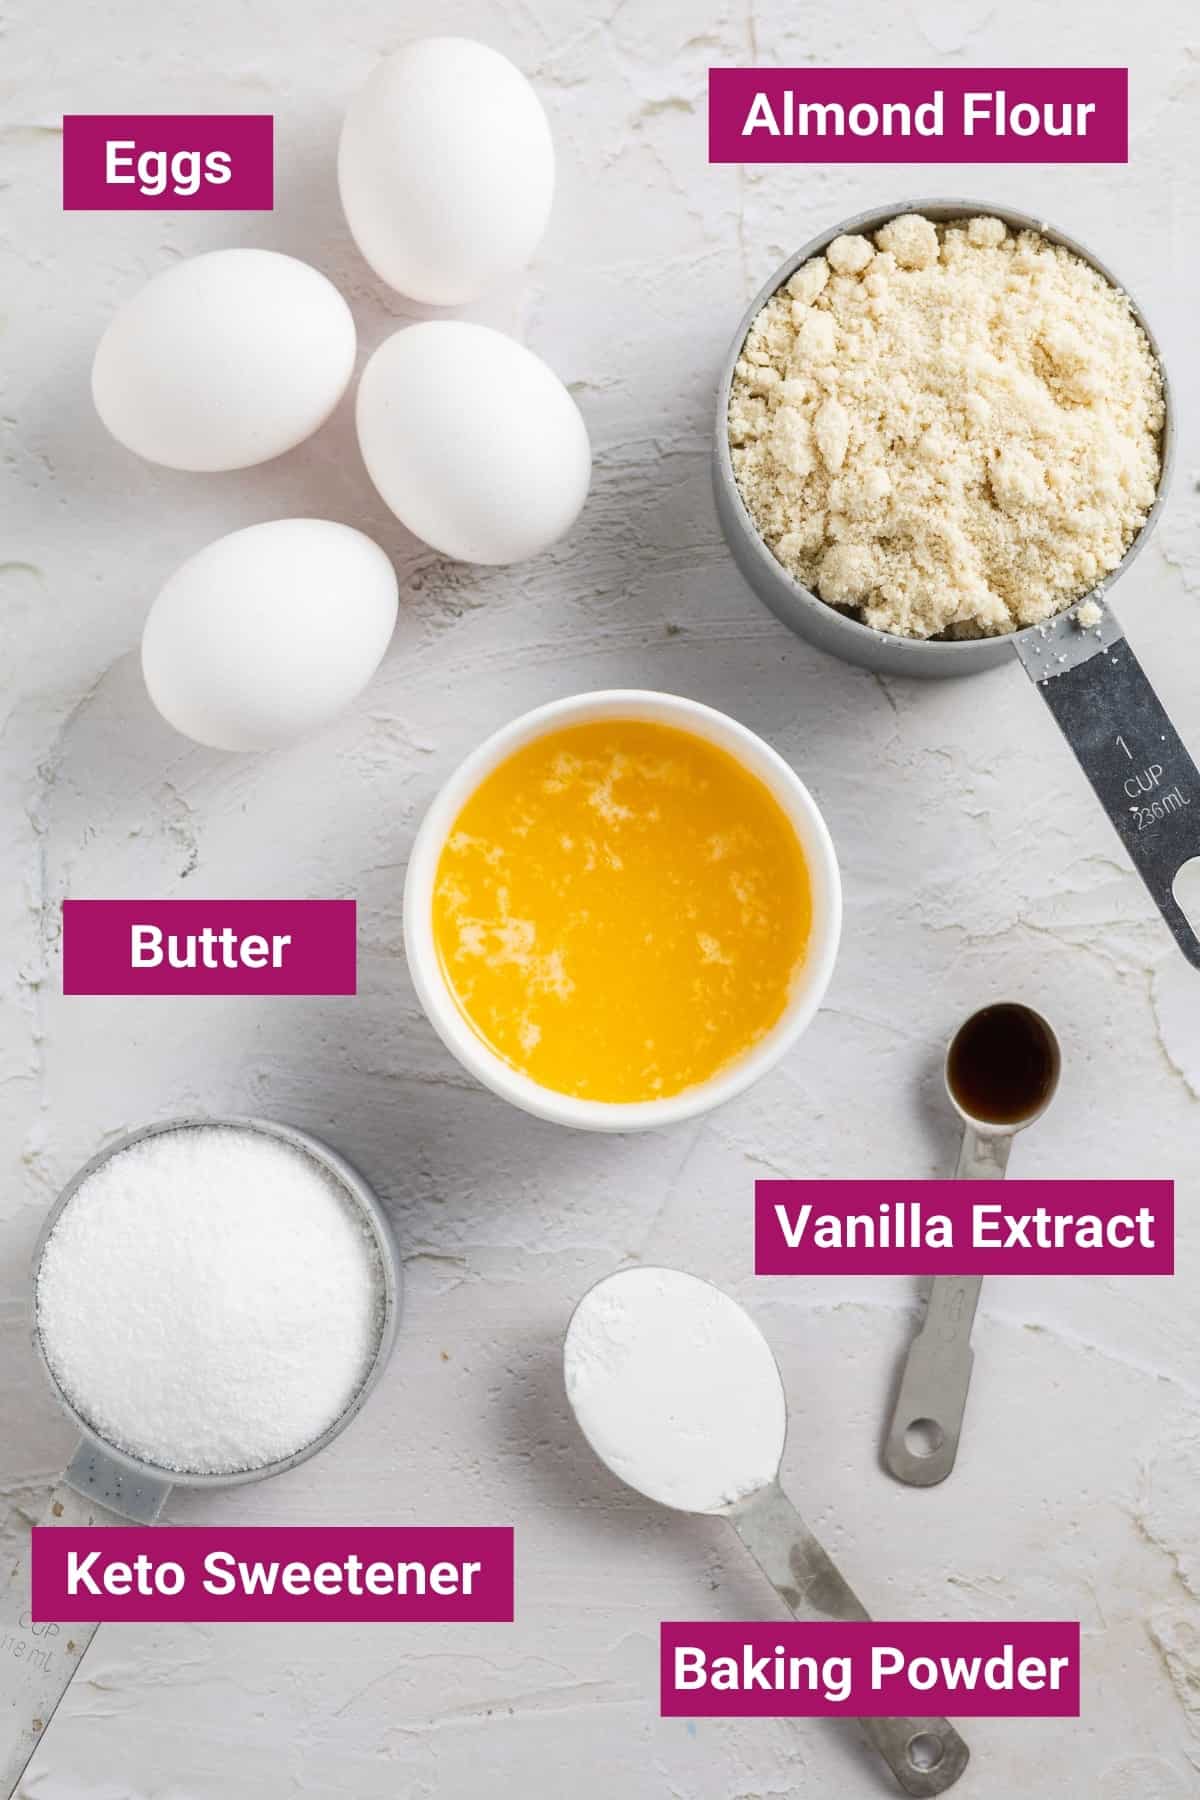 ingredients needed to make keto cornbread with almond flour like almond flour, melted butter, eggs, vanilla extract, sweetener